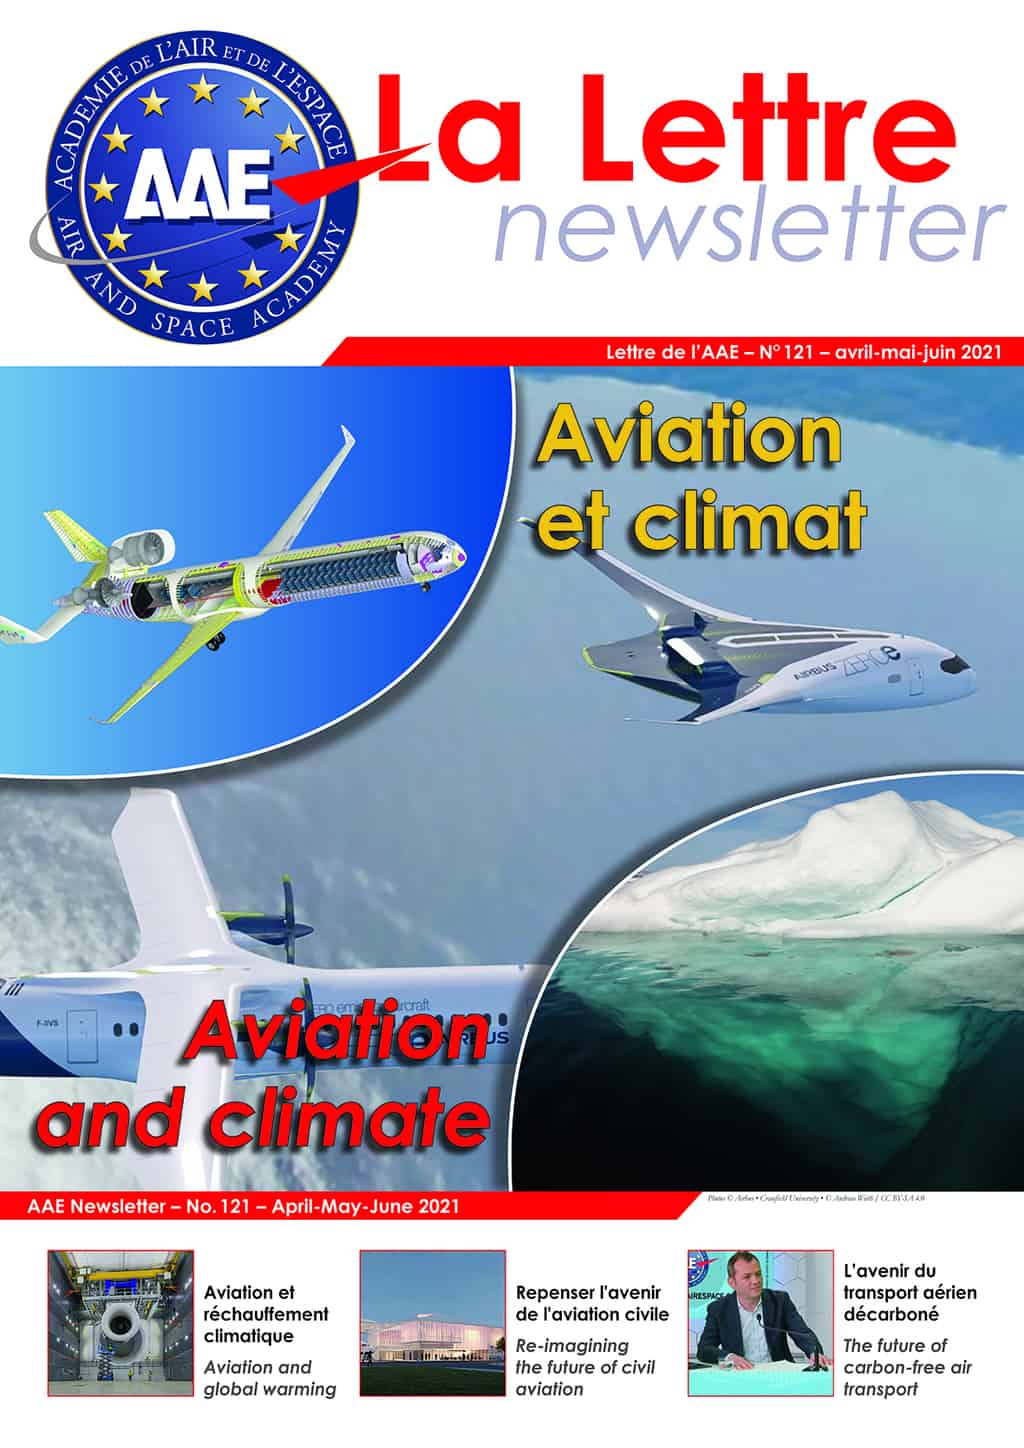 Newsletter No.121 – Aviation and climate